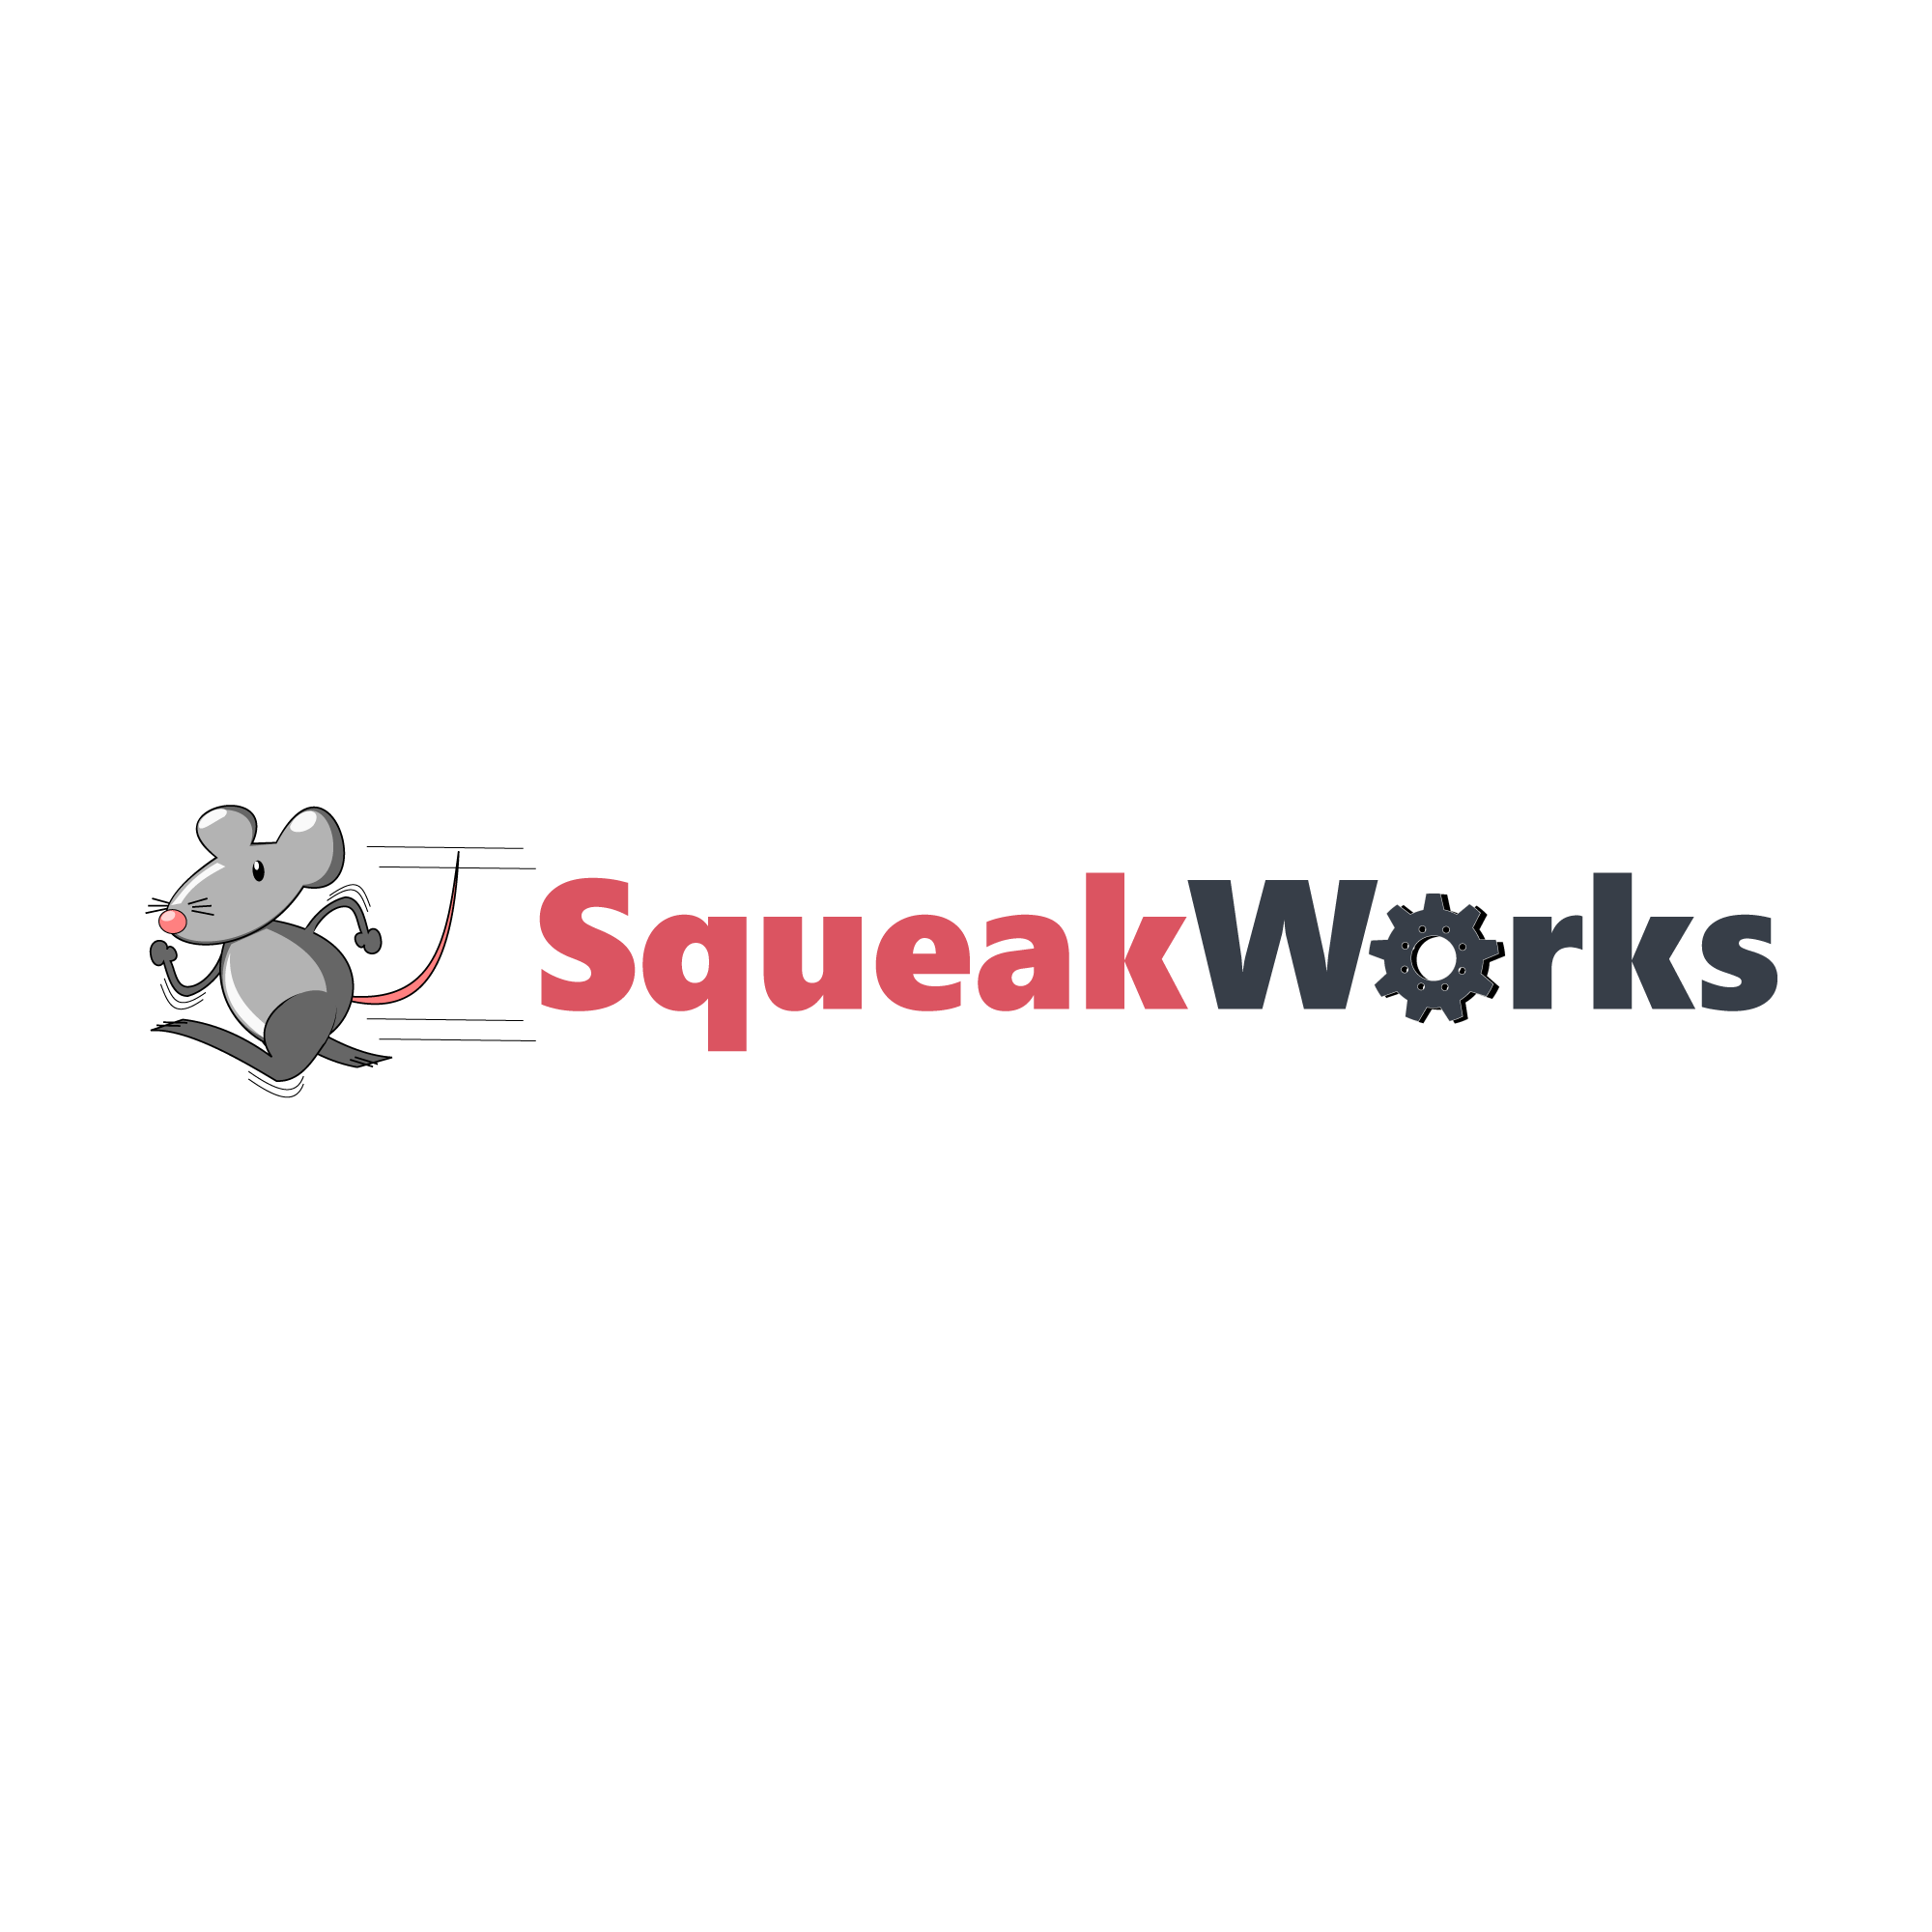 Announcing SqueakWorks is in pre-launch; signup available for the onboarding waitlist.